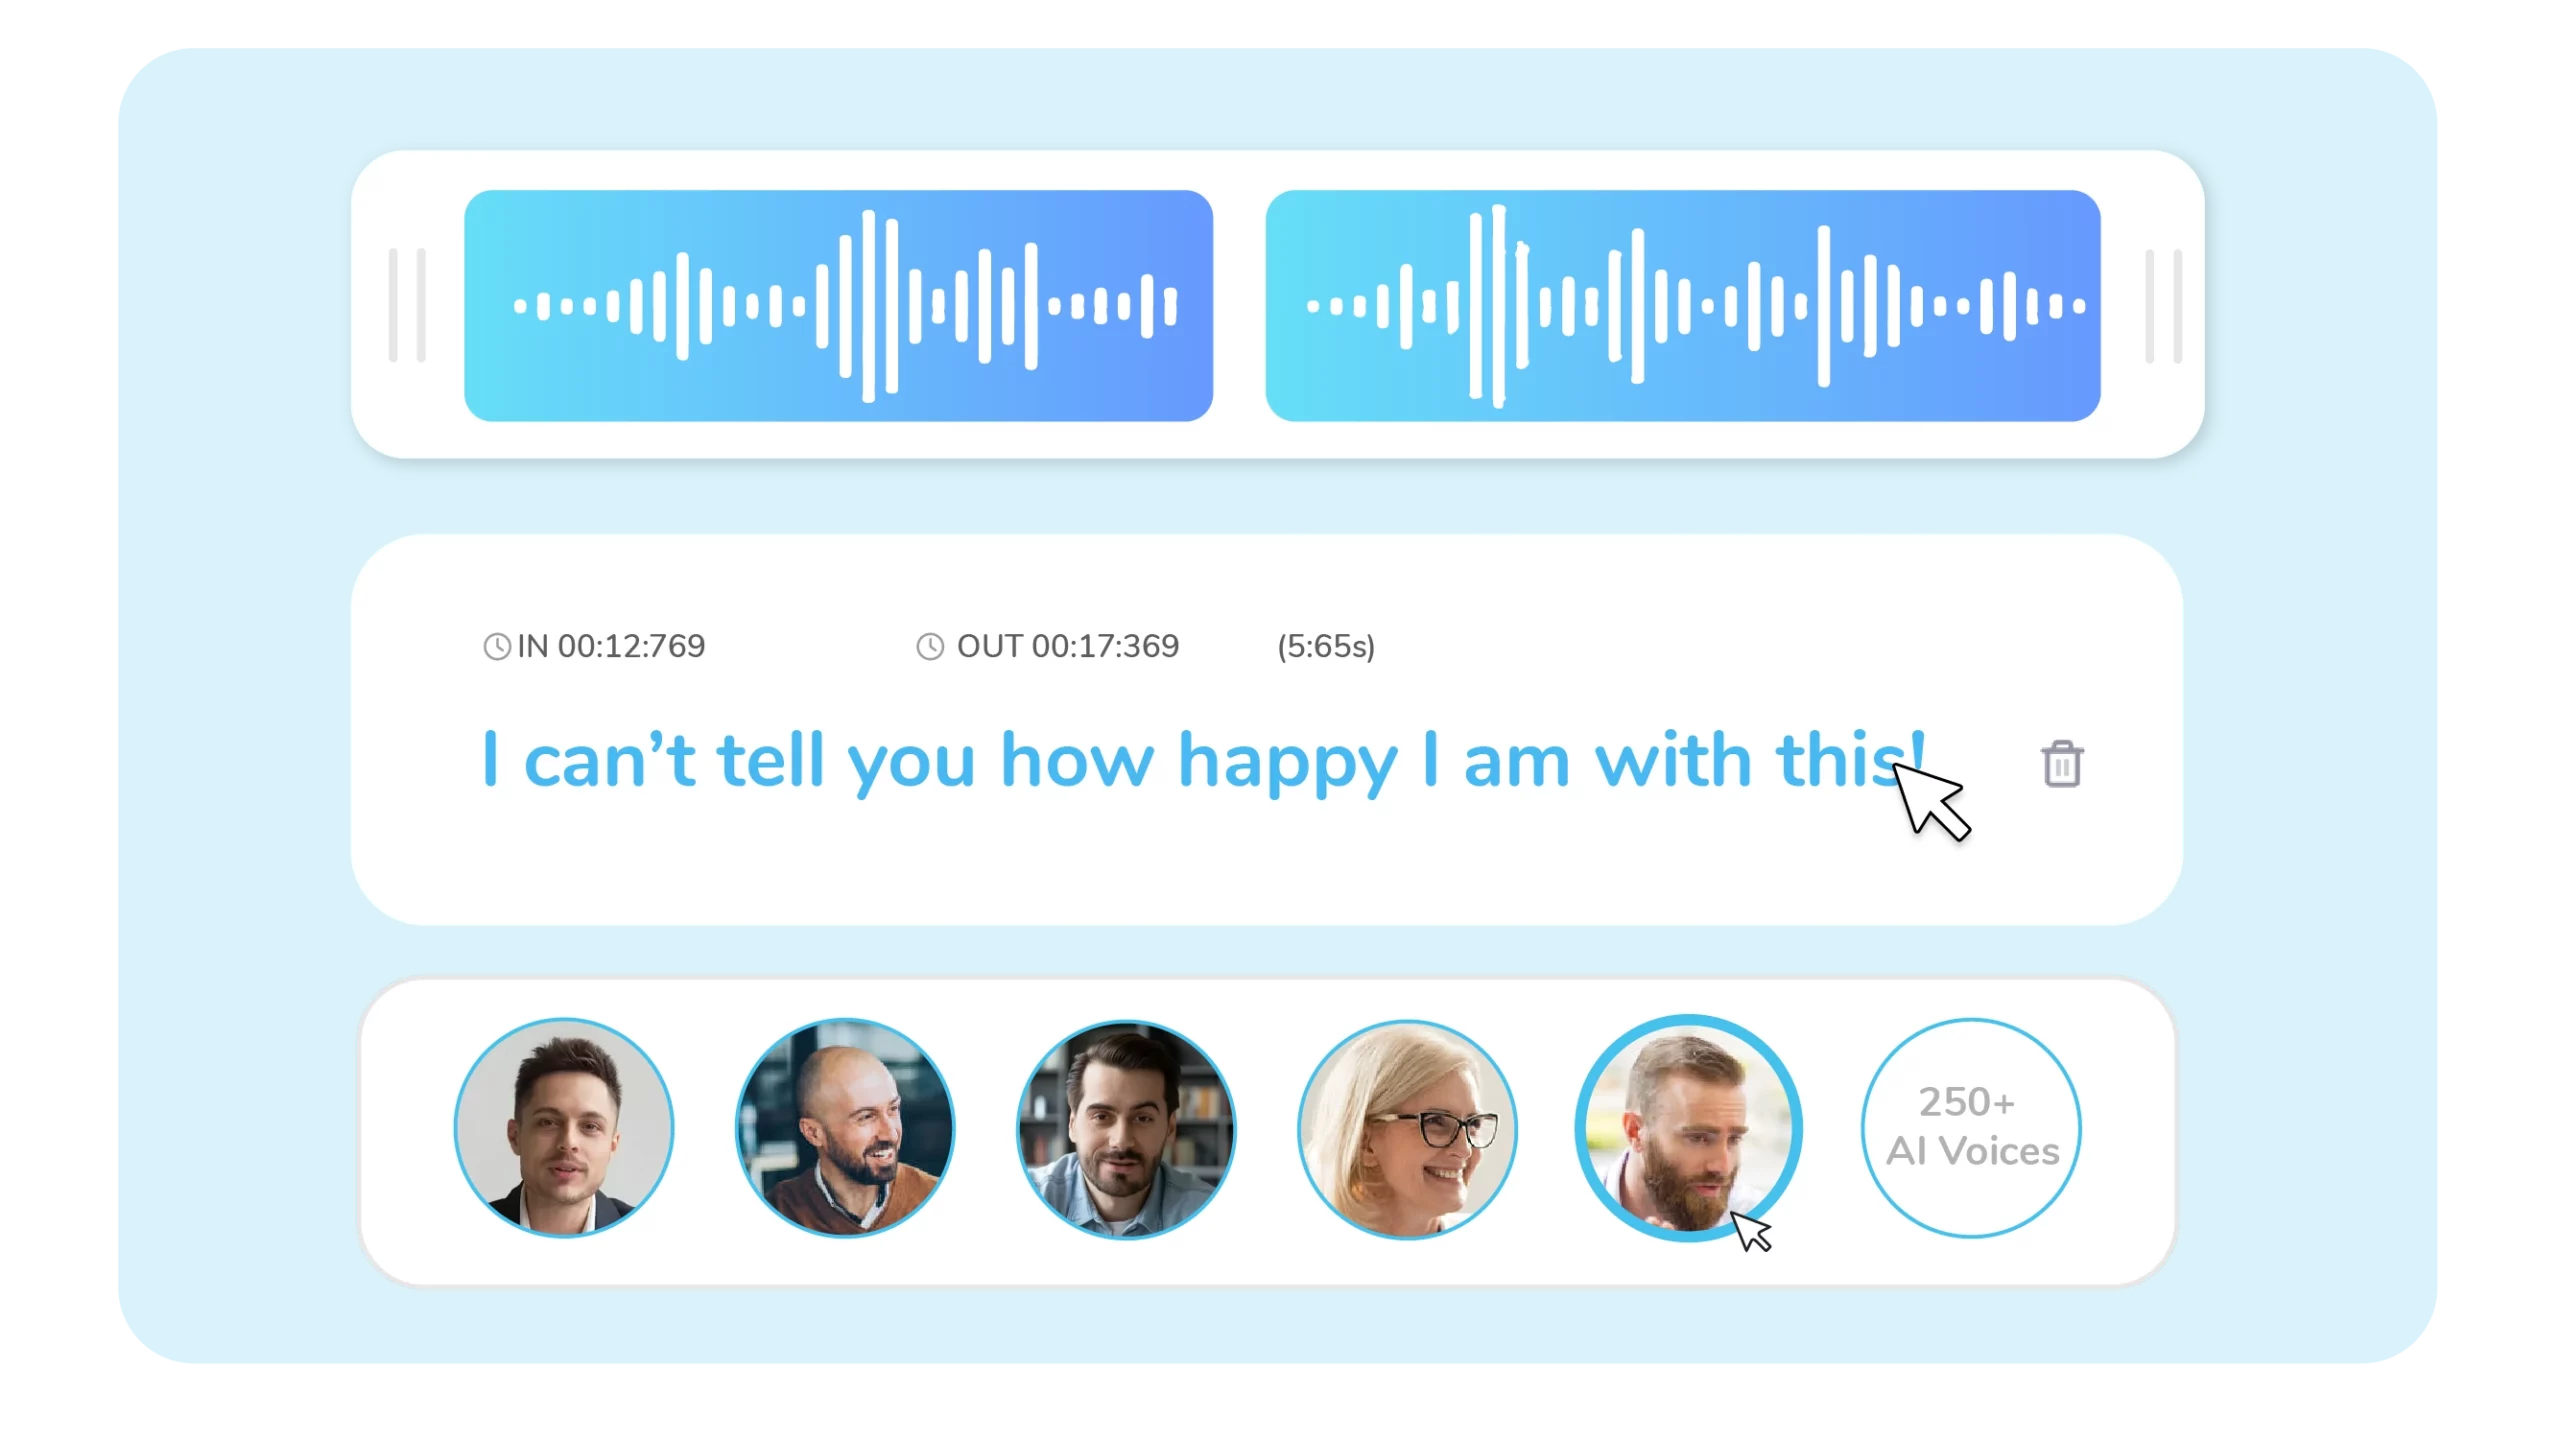 Customise Your Voice: